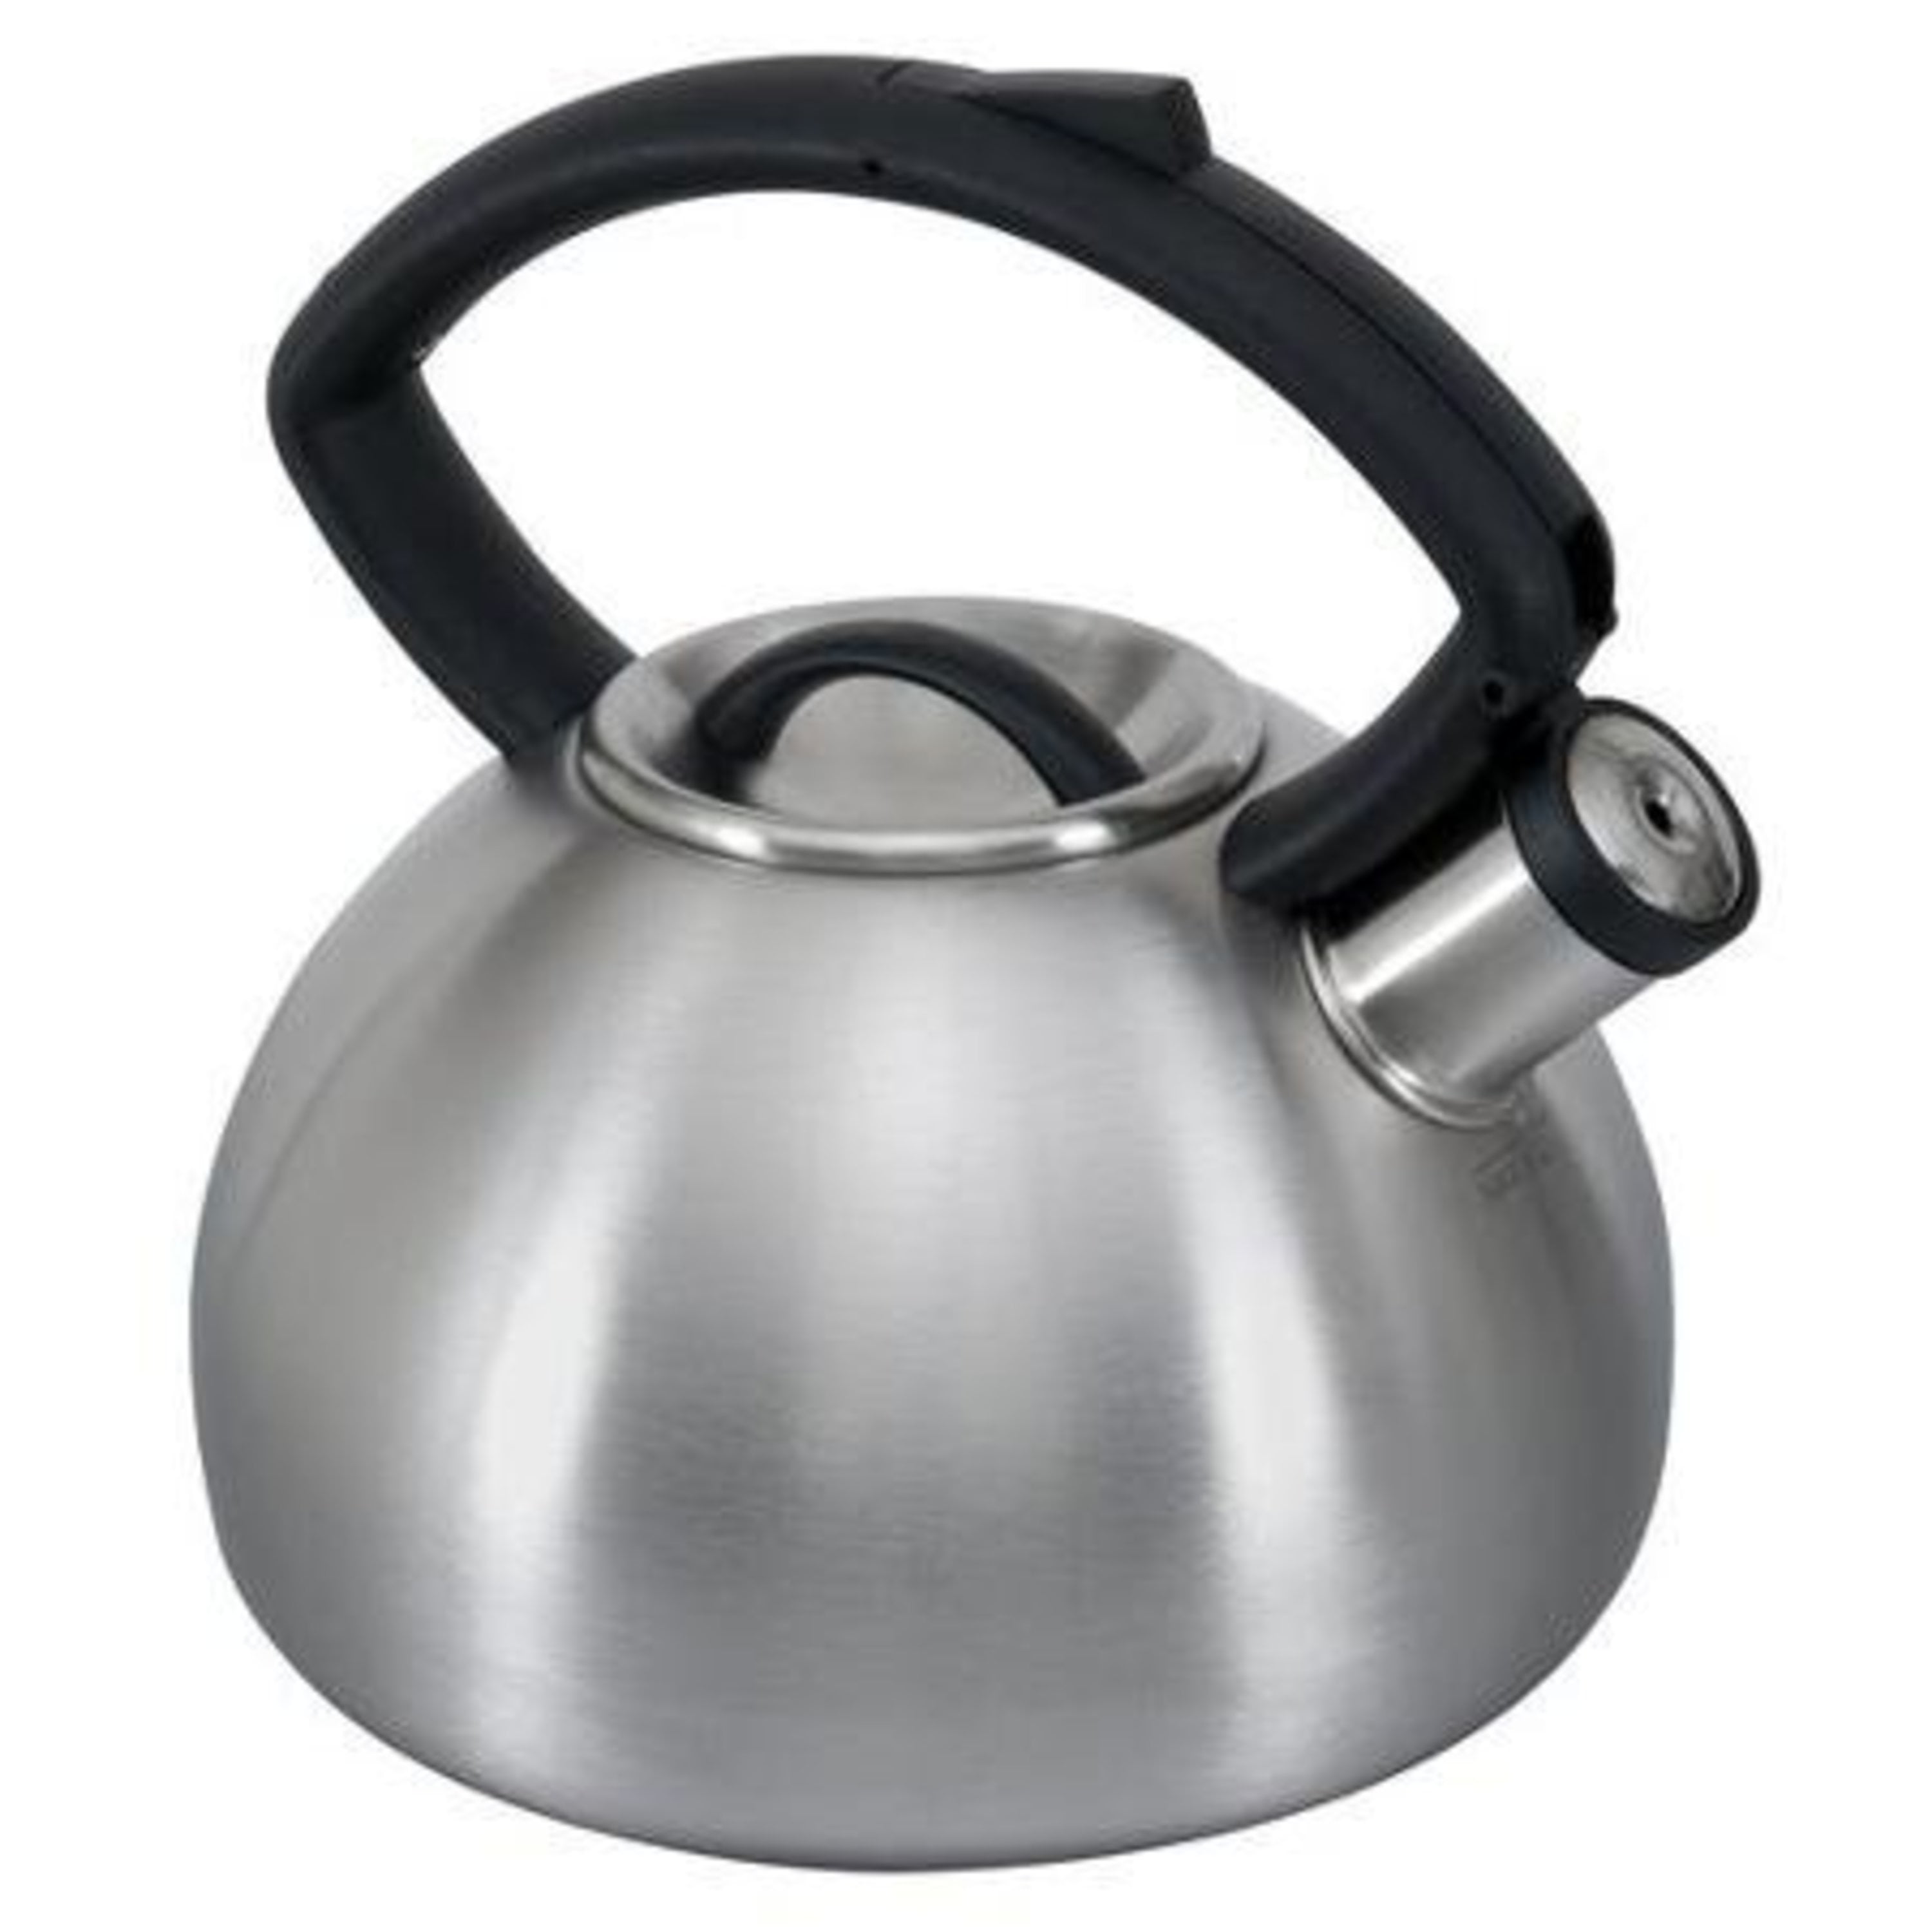  Copco Stainless Steel 2.1 Quart Whistling Tea Kettle, Glossy  Copper Finish: Home & Kitchen